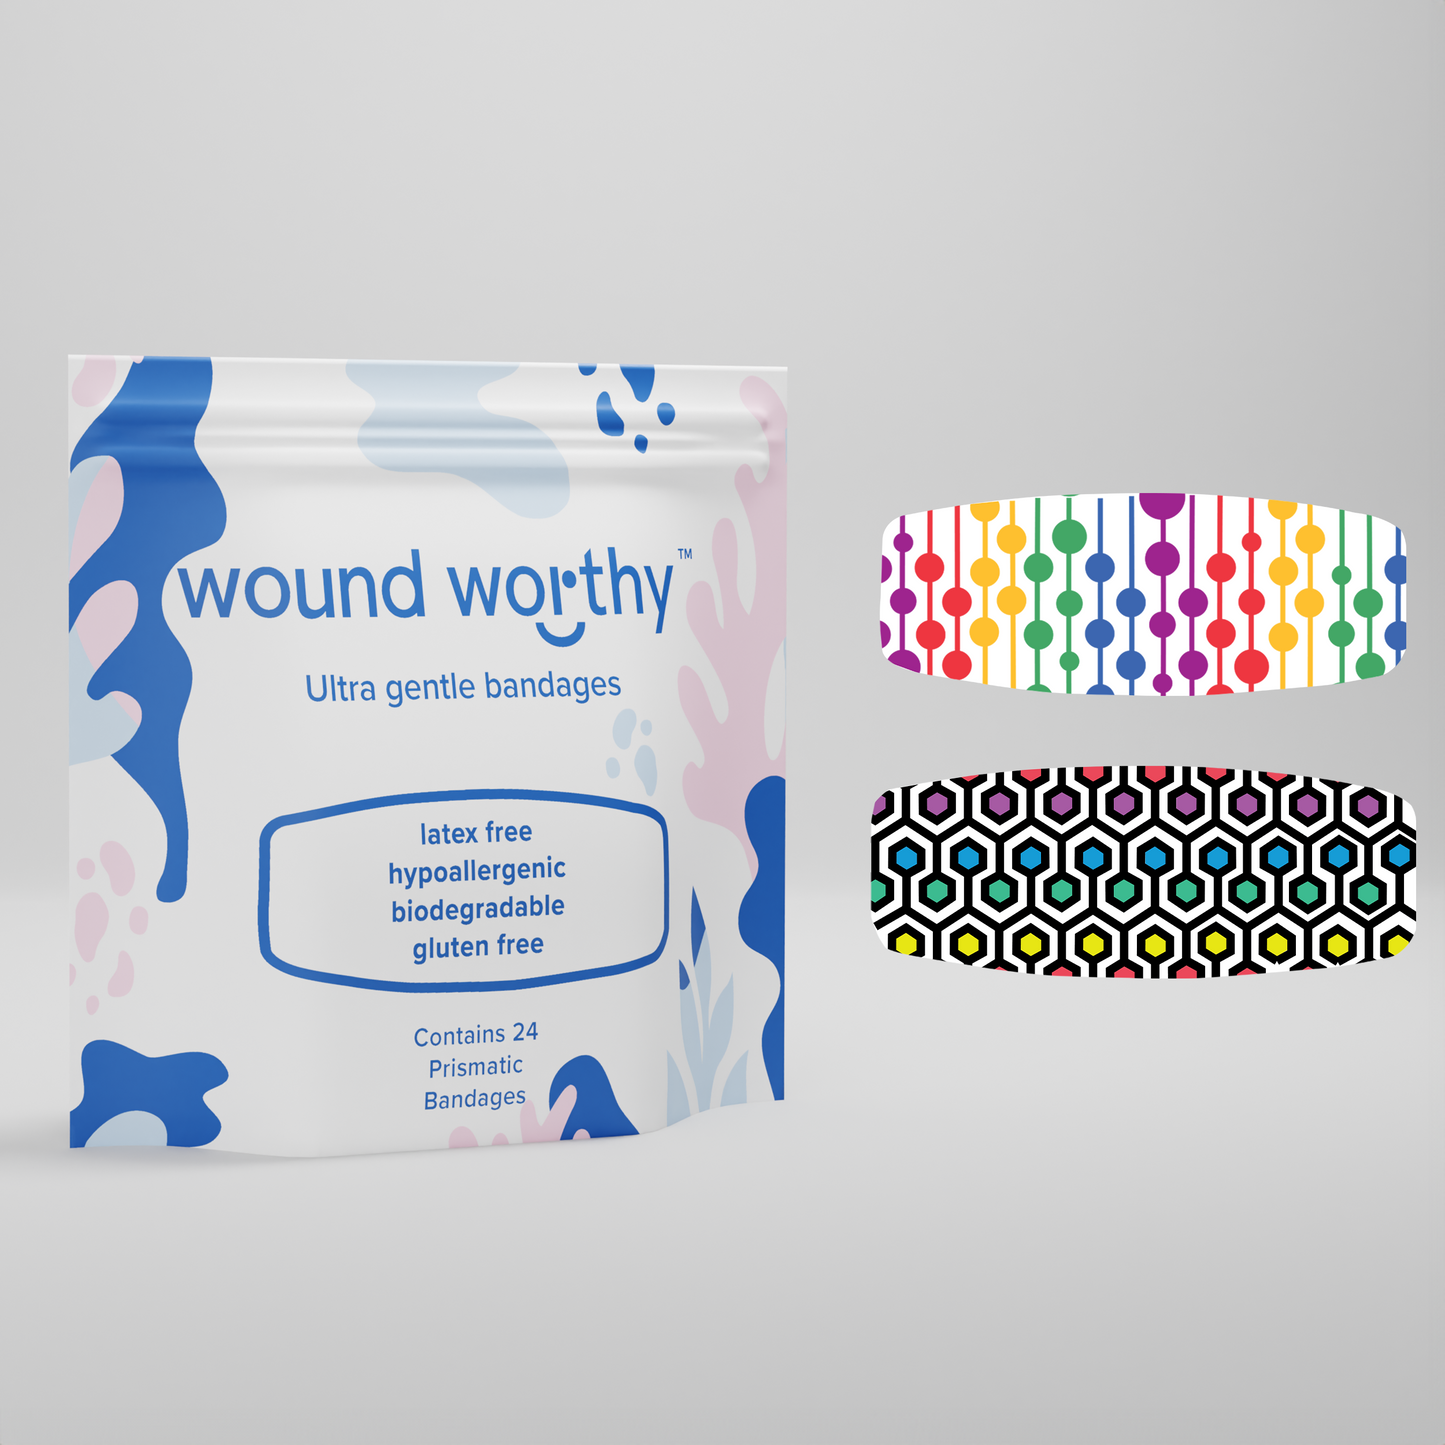 Prismatic - Wound Worthy Ultra Gentle Bandages